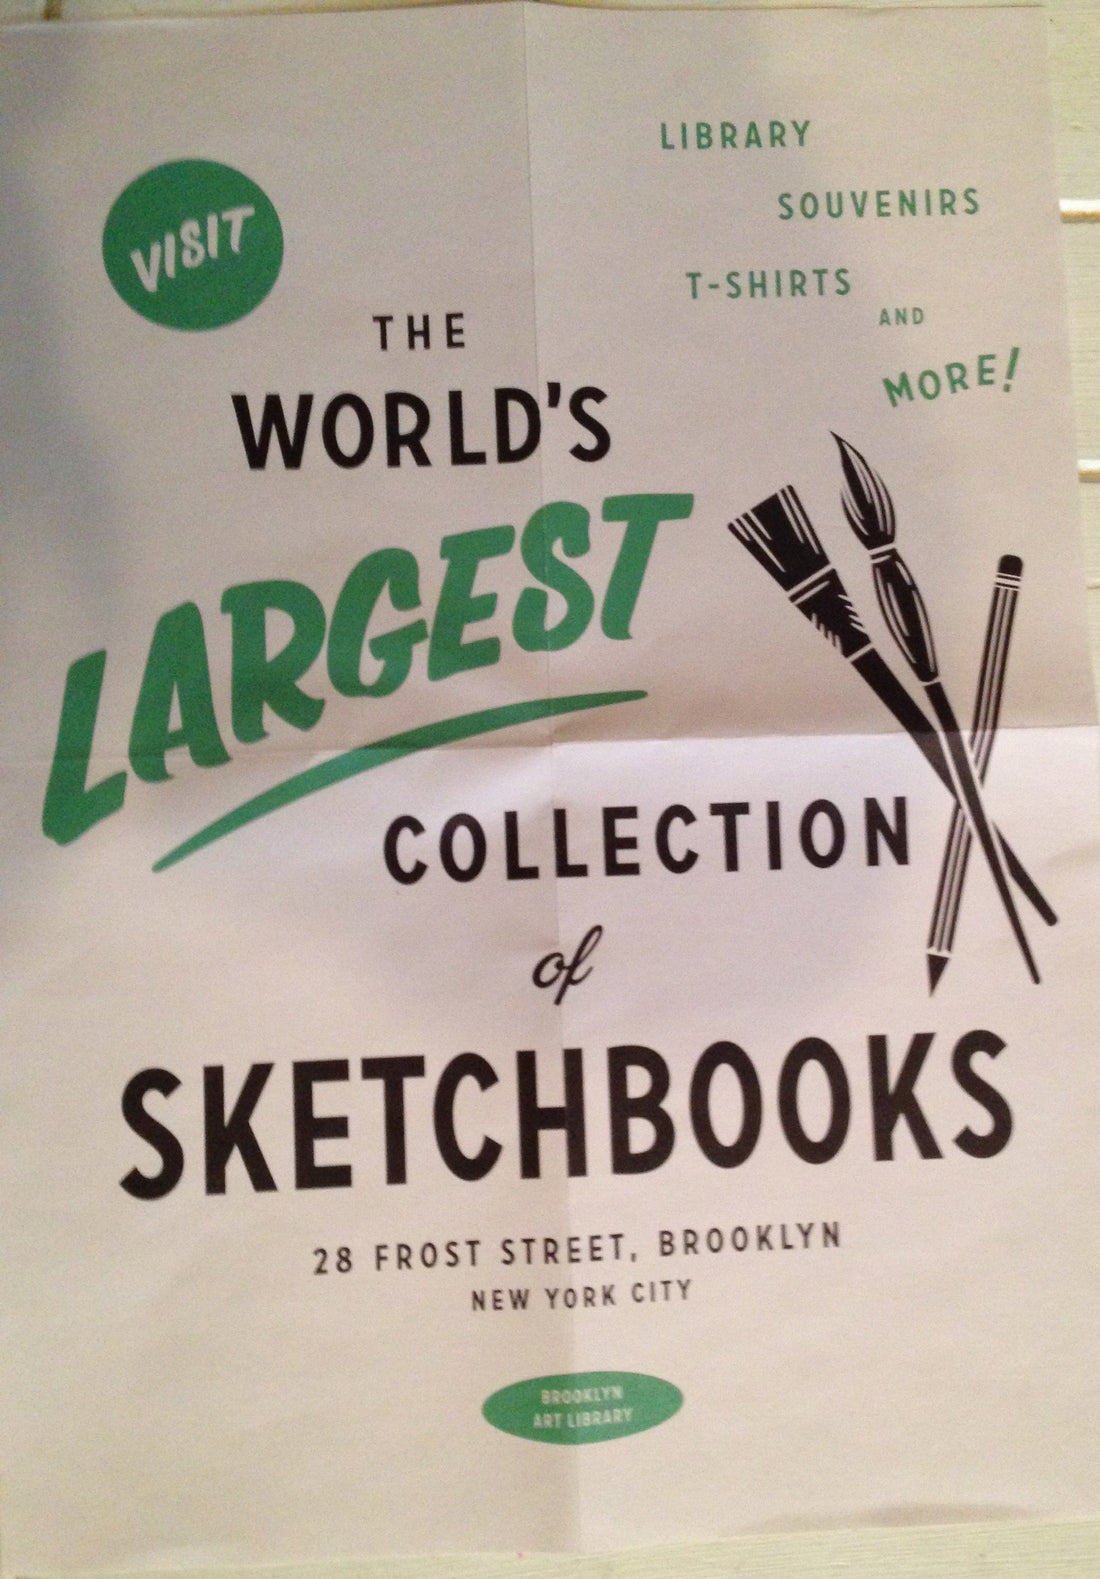 Sketchbook Project at the Brooklyn Art Library